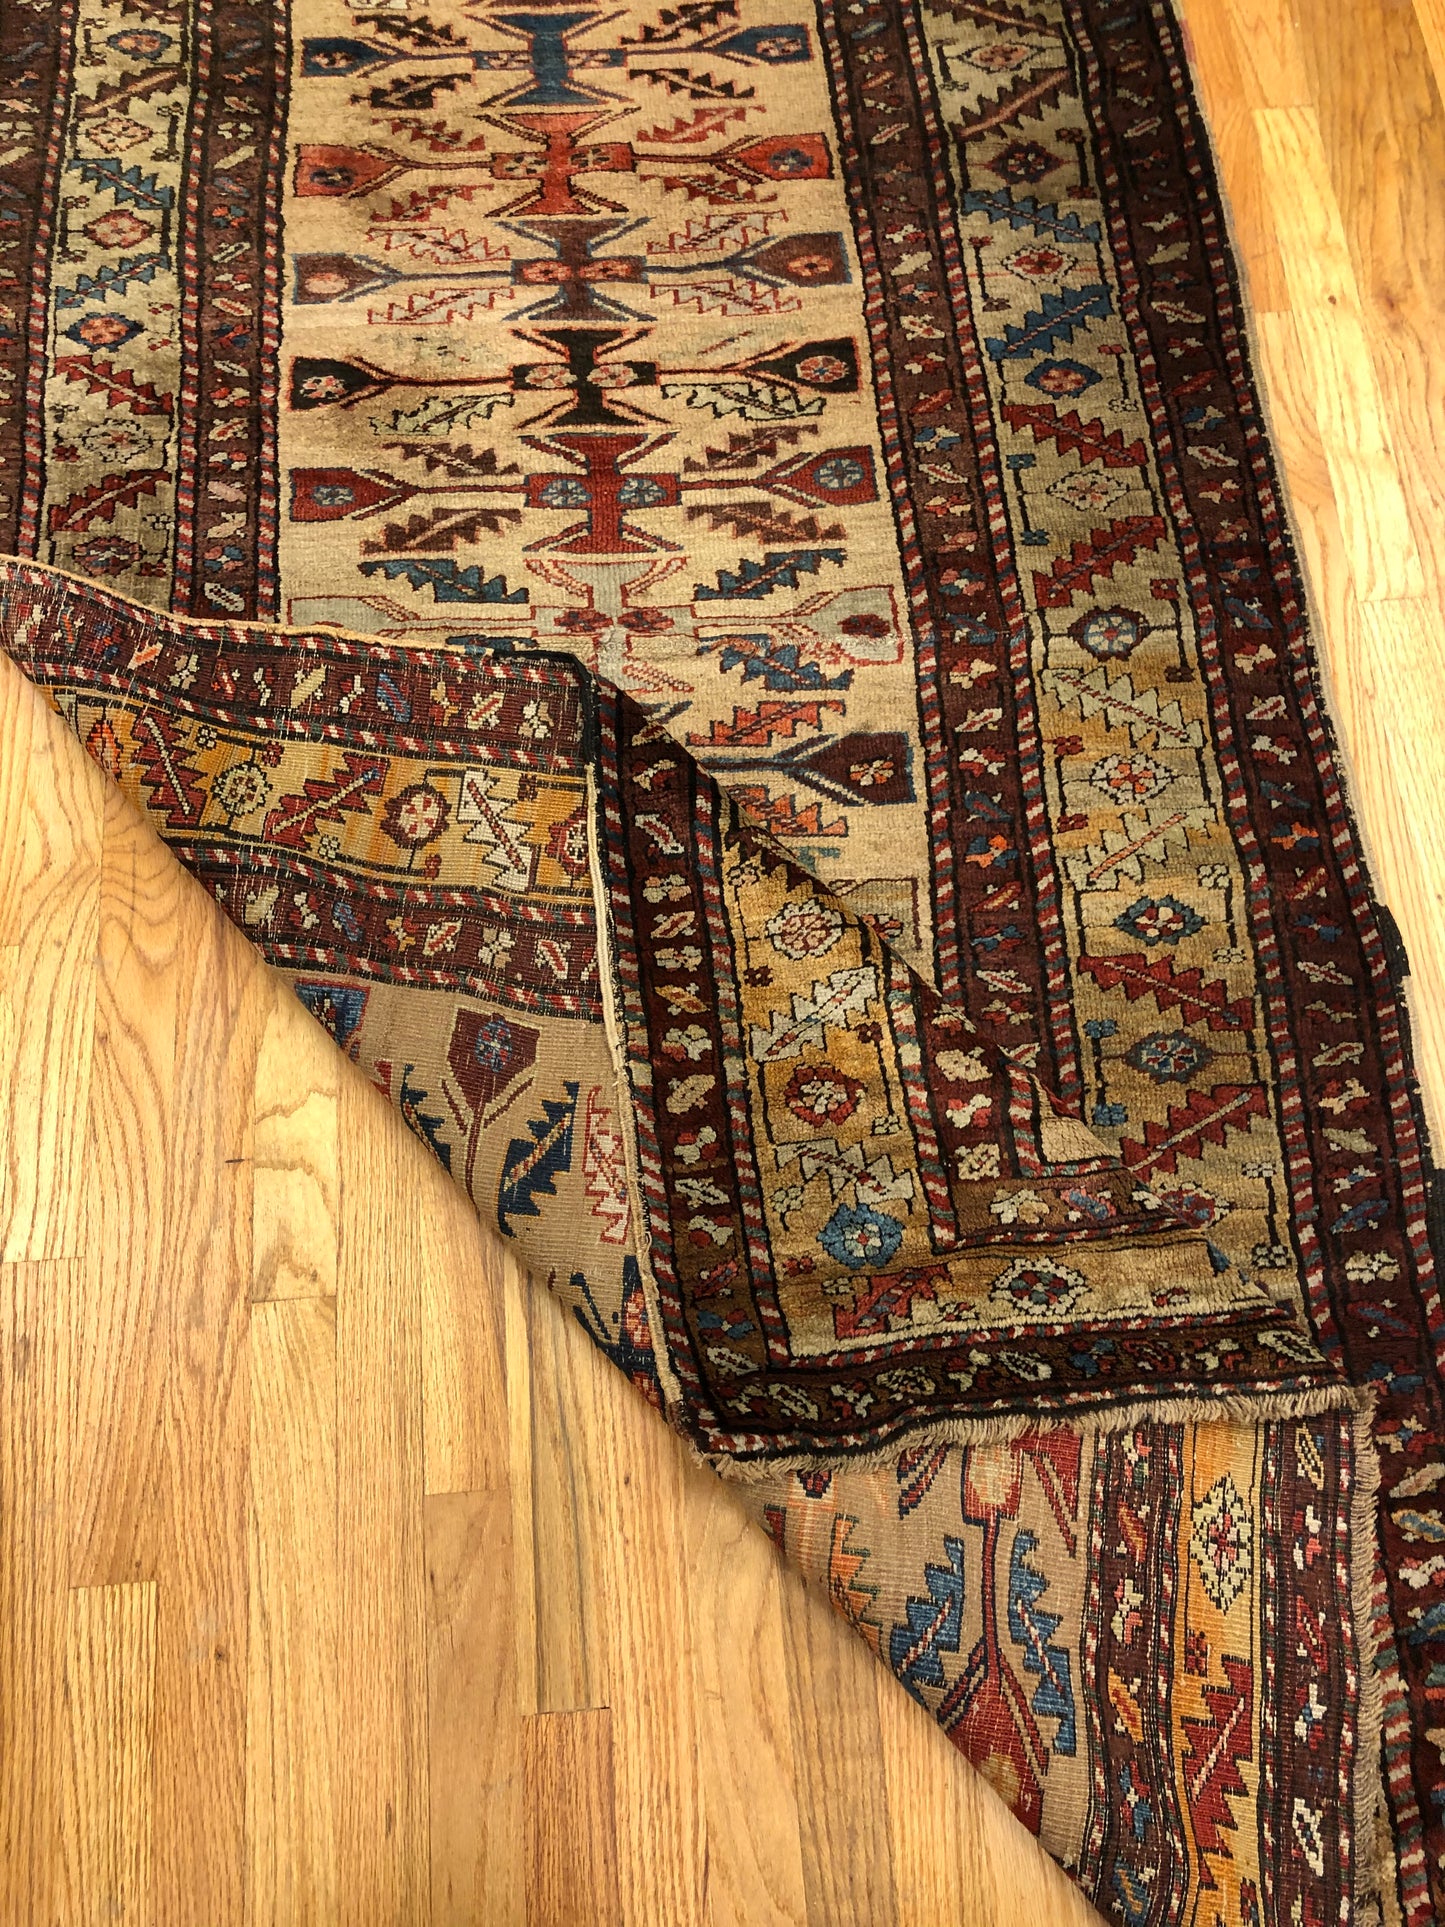 Runner - North West Camel Hair - 11'4 x 3'7 ft (ca.1870)